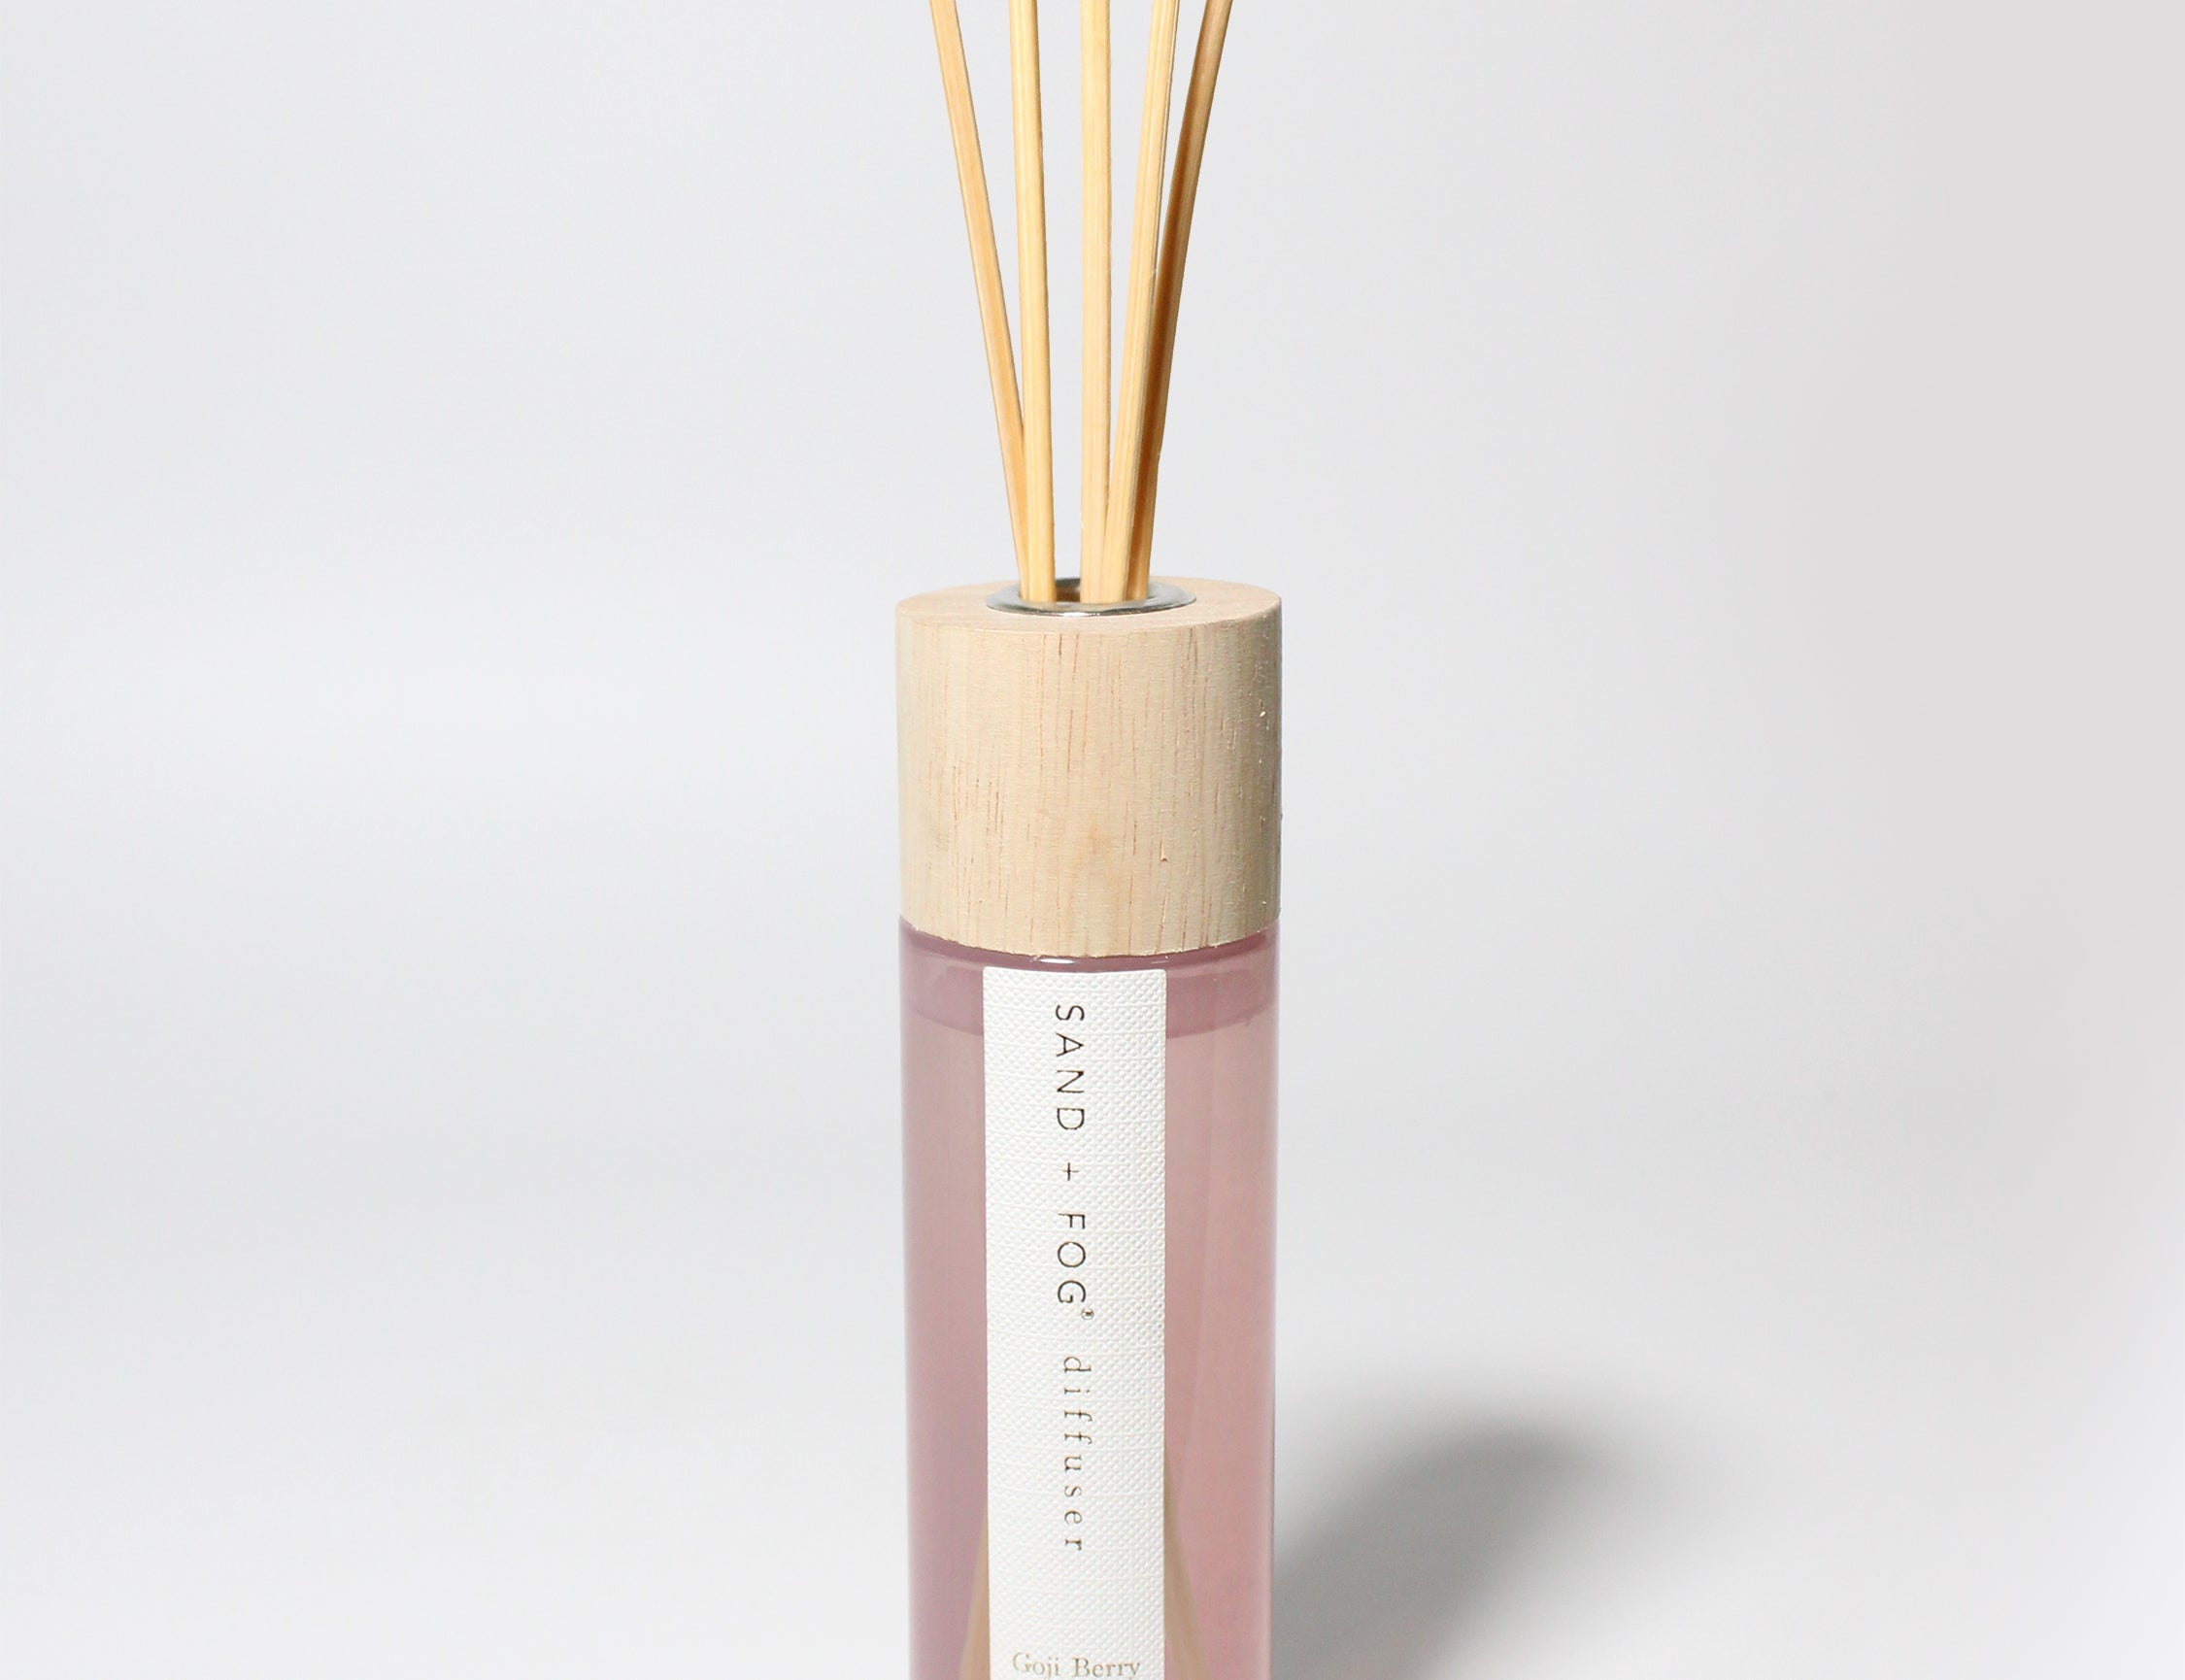 Goji Berry reed diffuser Pink Glass with Wood top